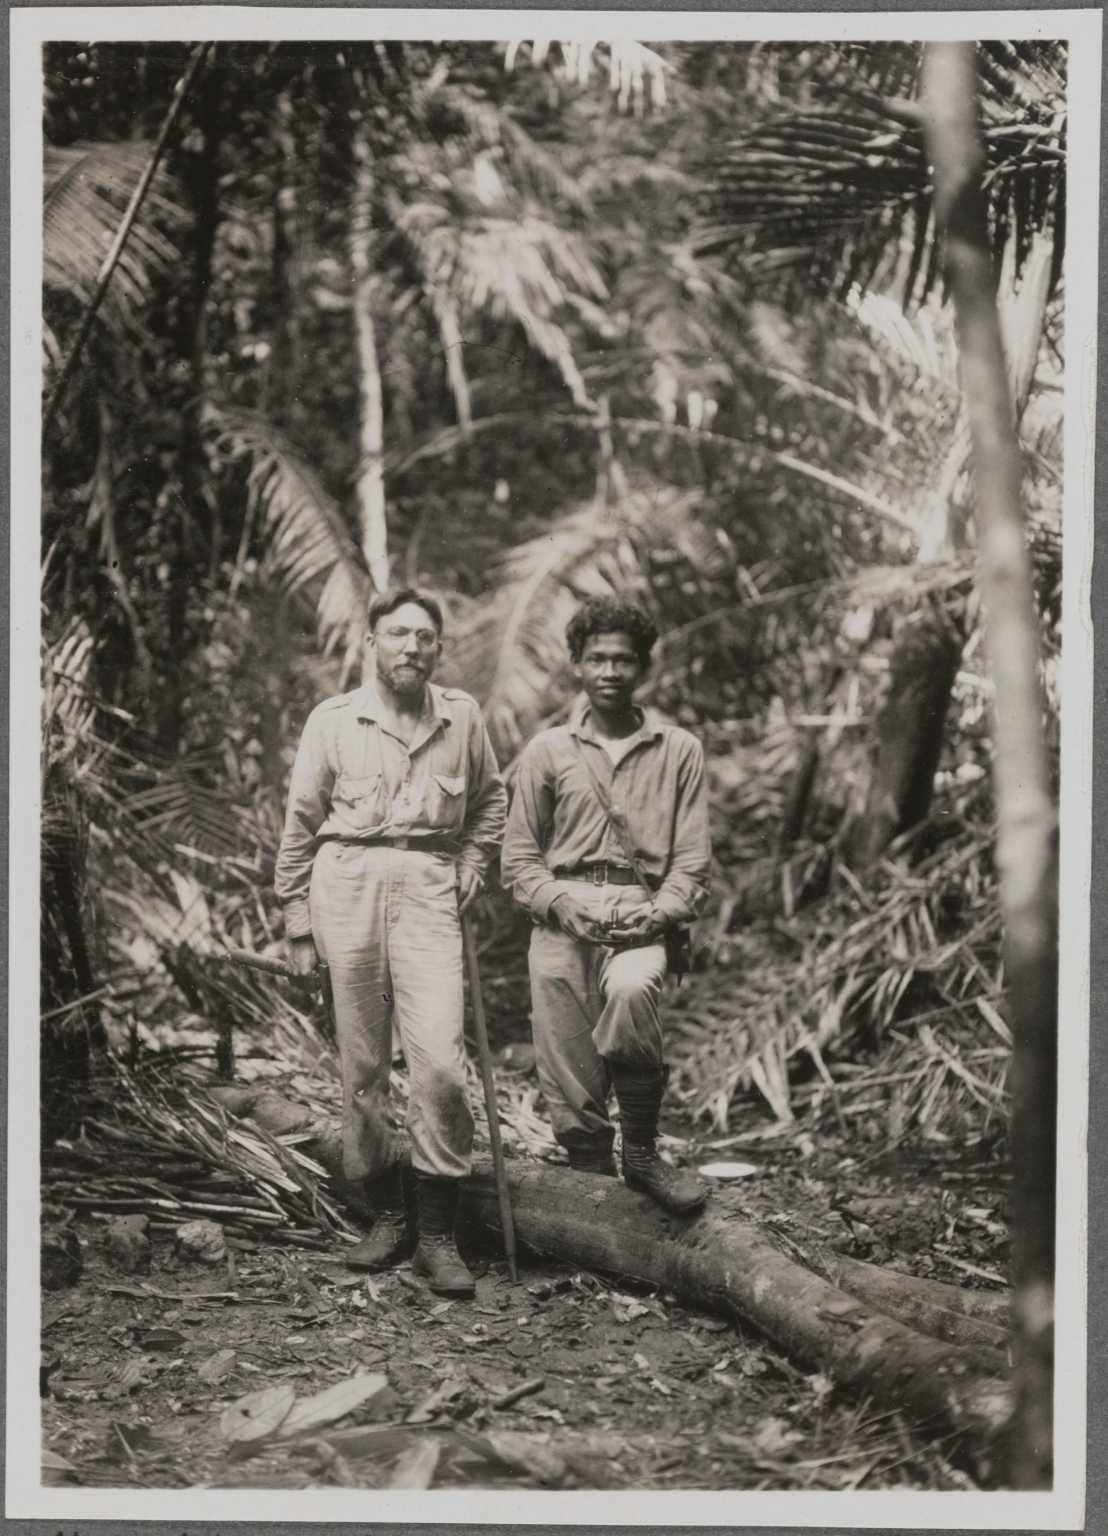 The Swiss geologist and ETH lecturer Arnold Heim with the geometrician Suriadi on a research expedition through Sumatra